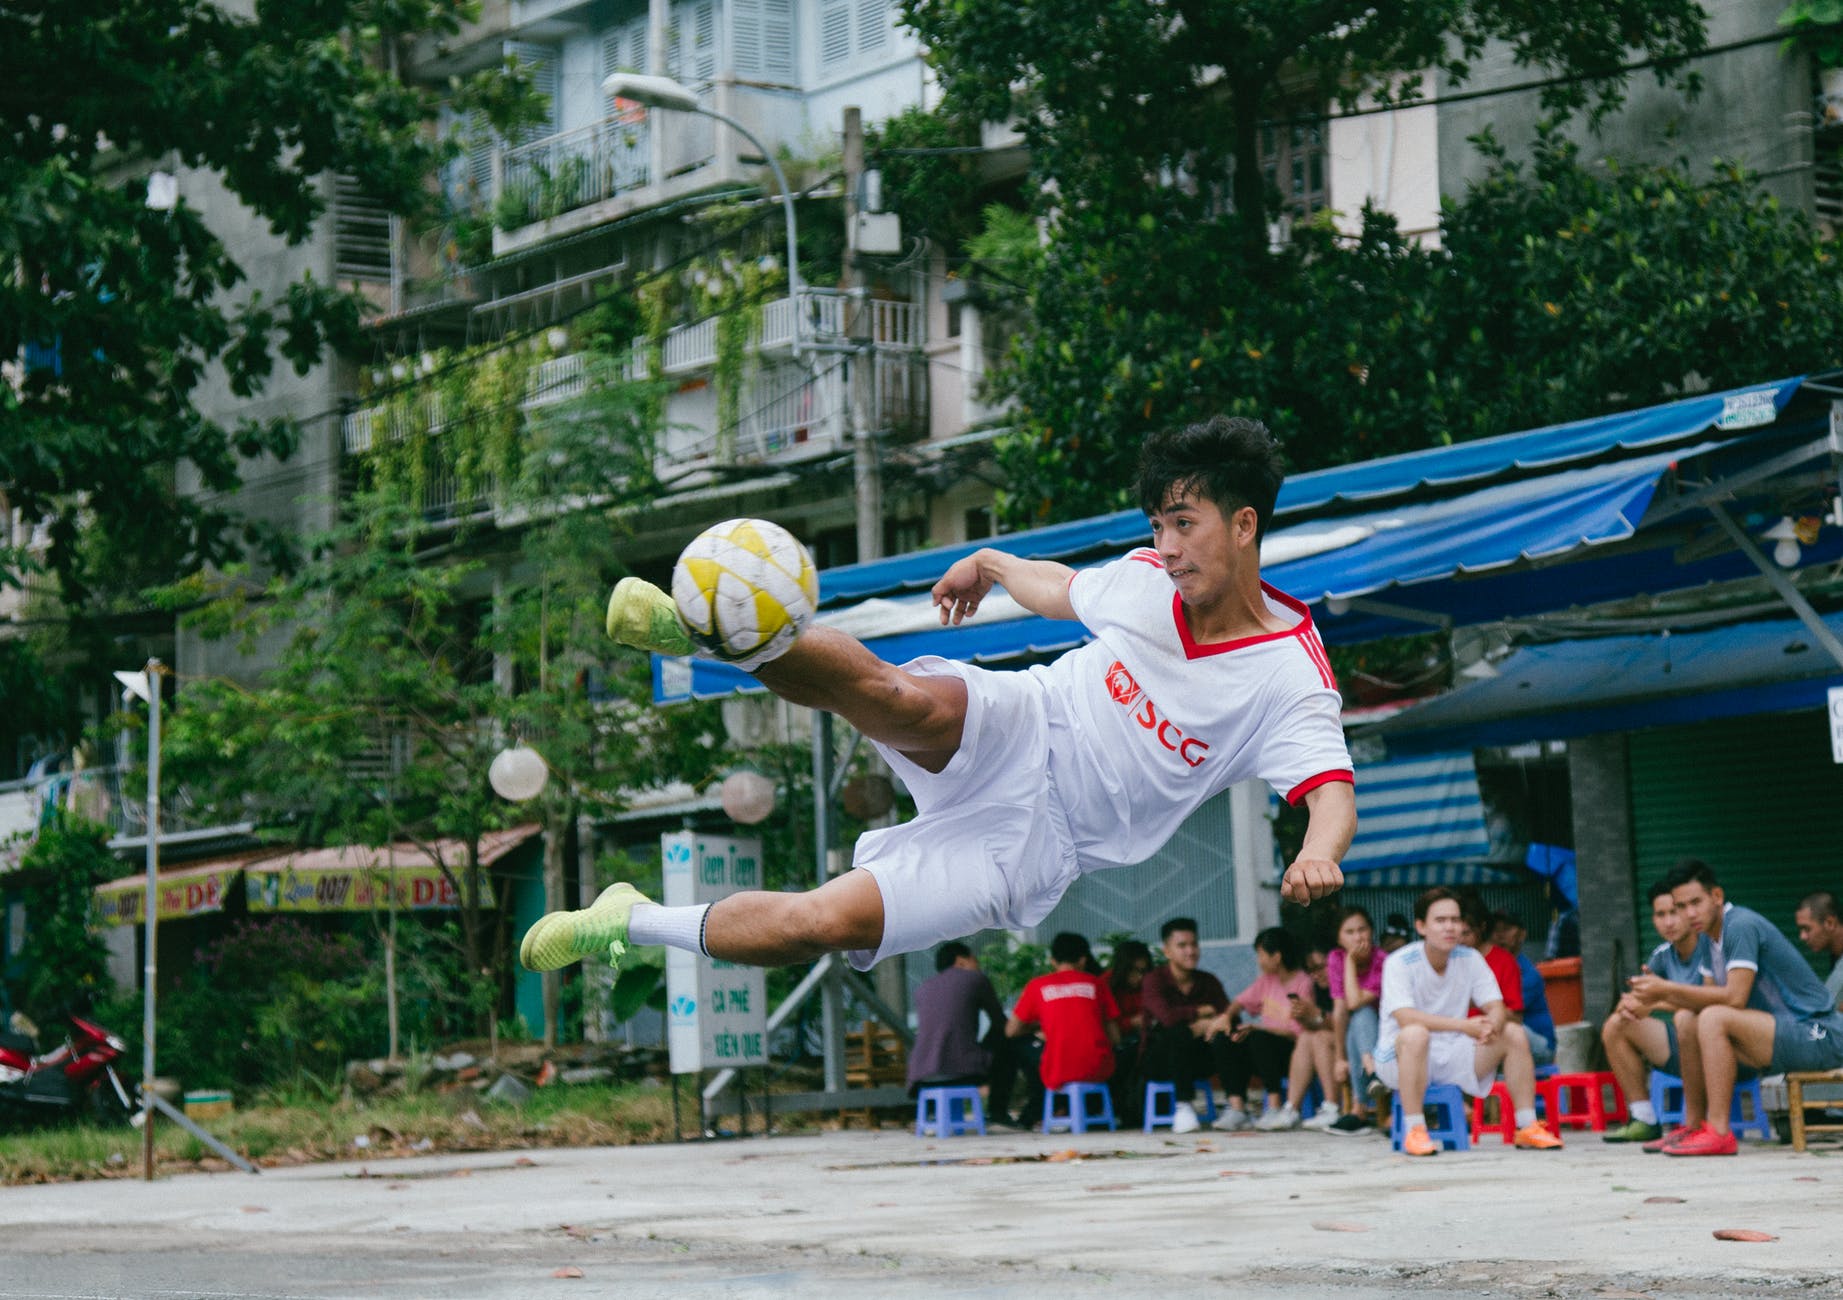 soccer player kick the ball near people sitting on canopy tent